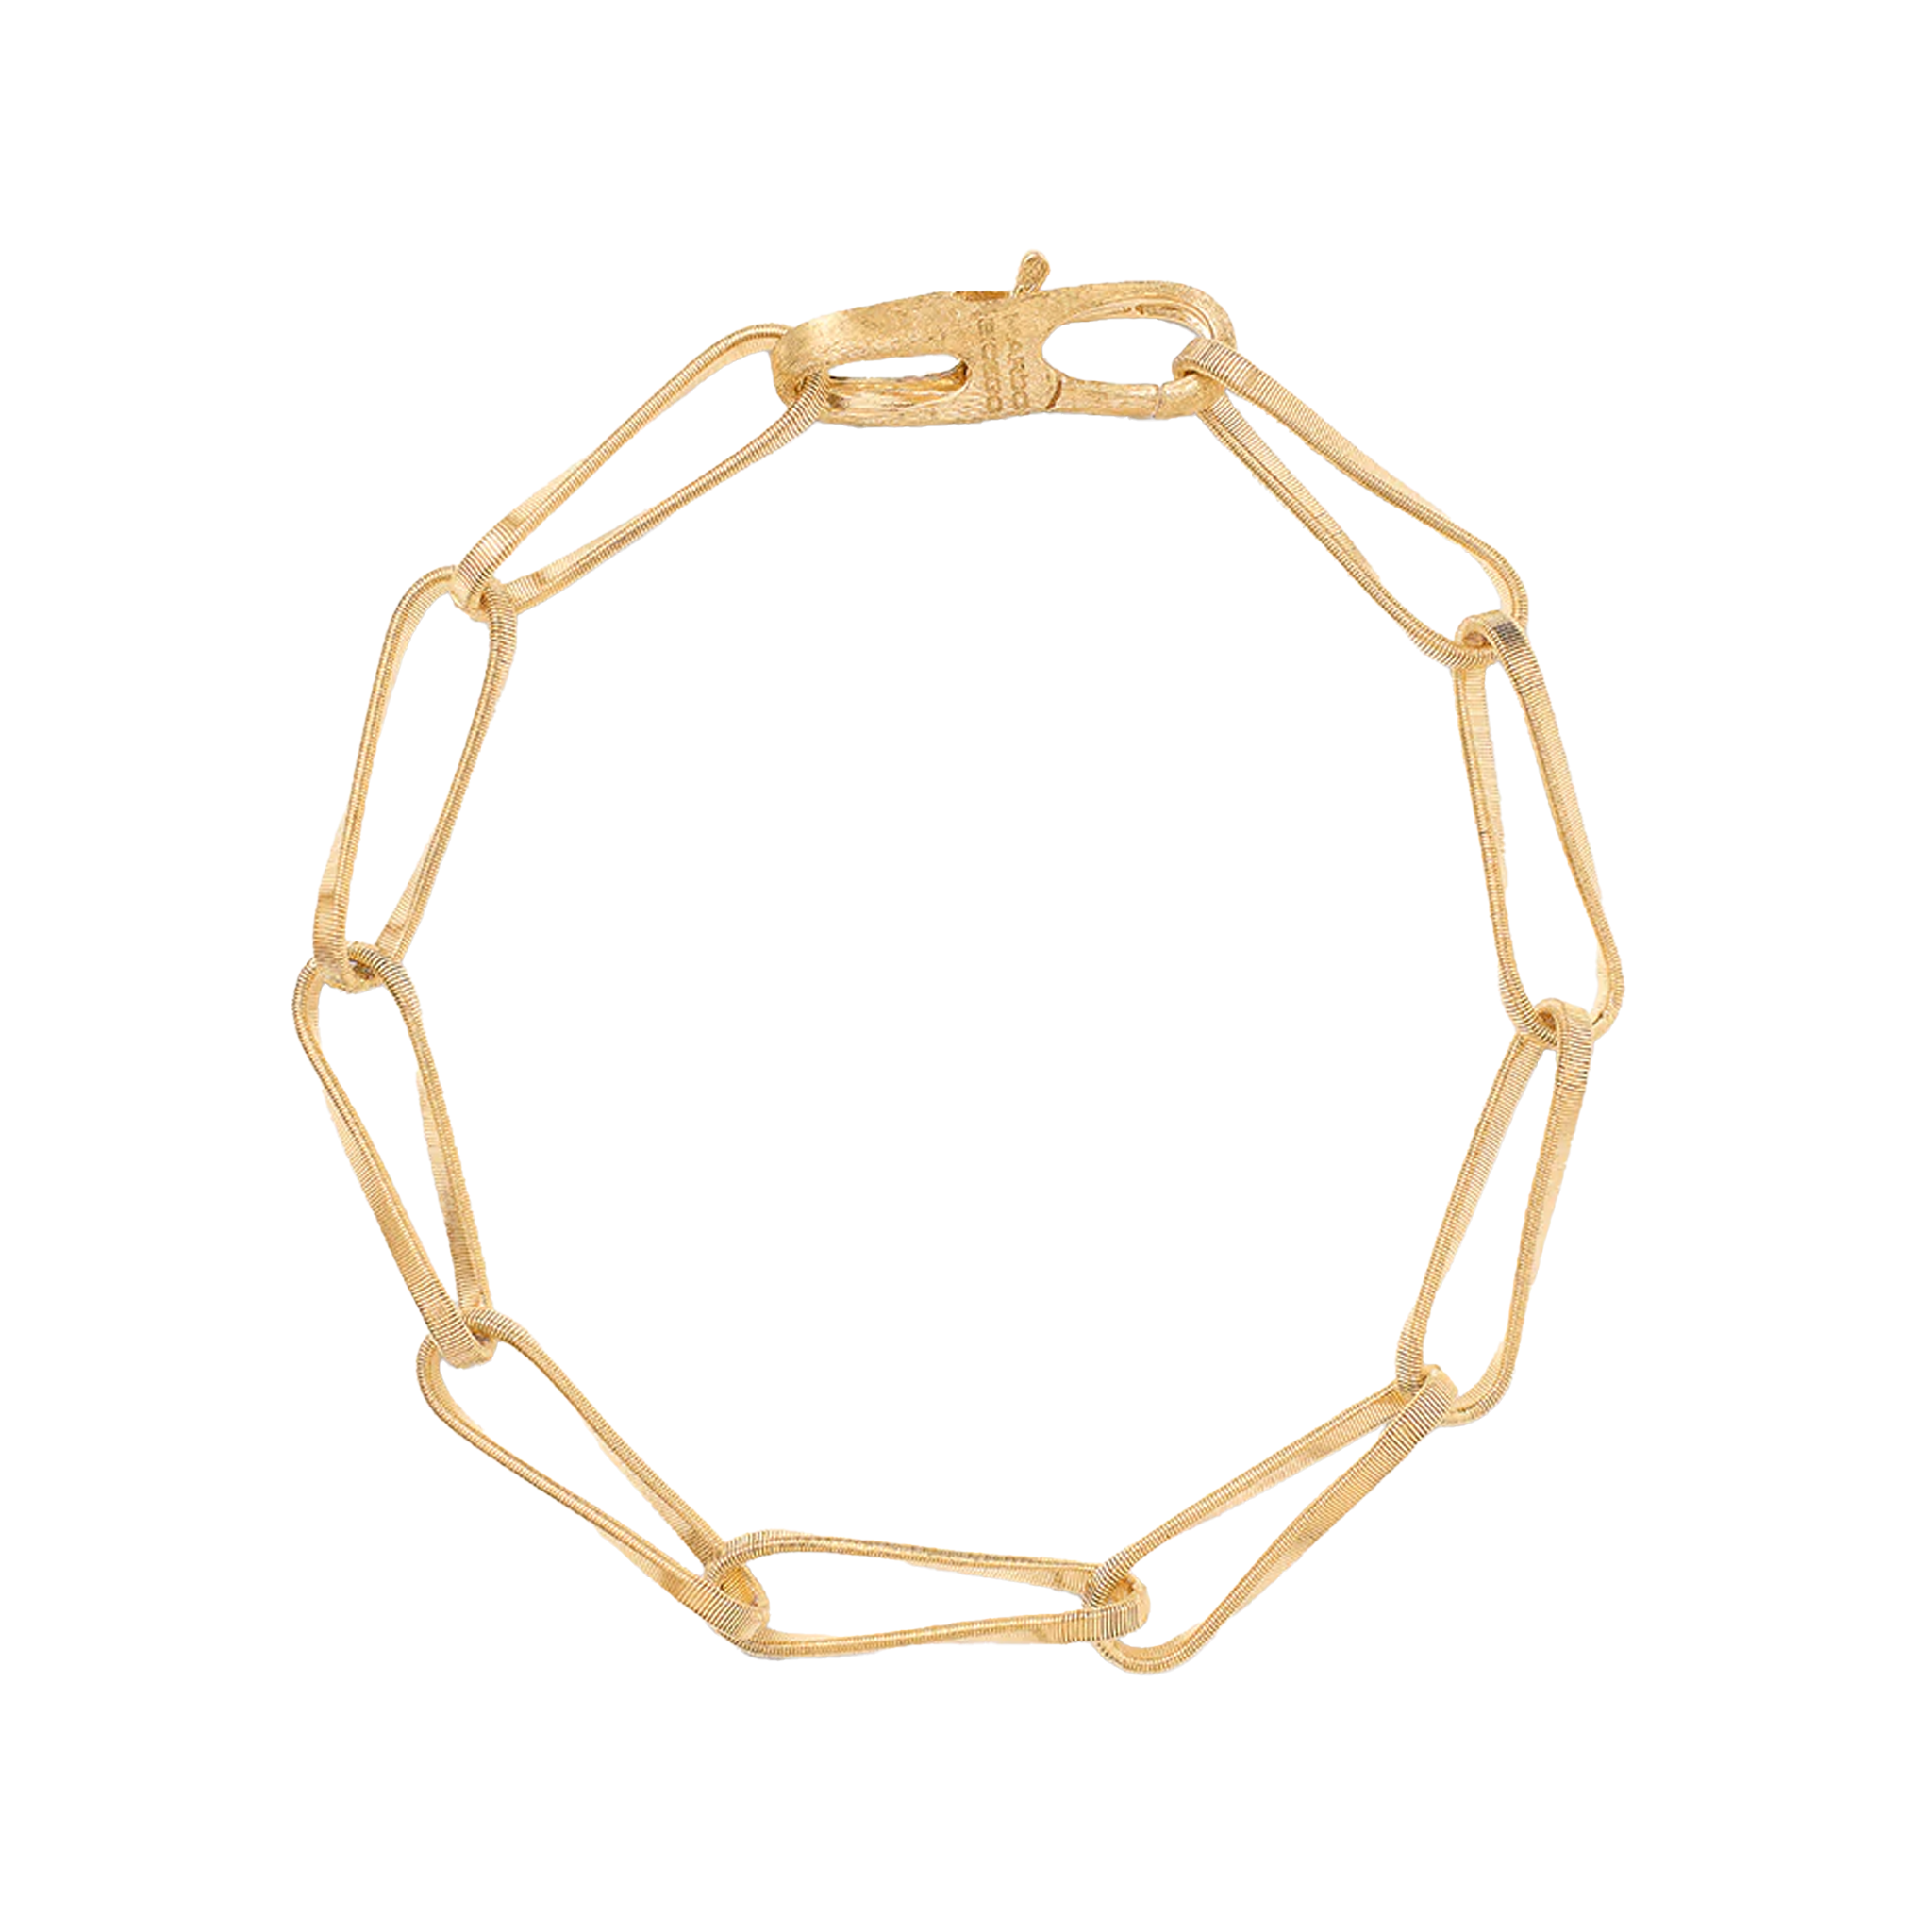 Marco Bicego 18K Yellow Gold Twisted Coil Link Bracelet